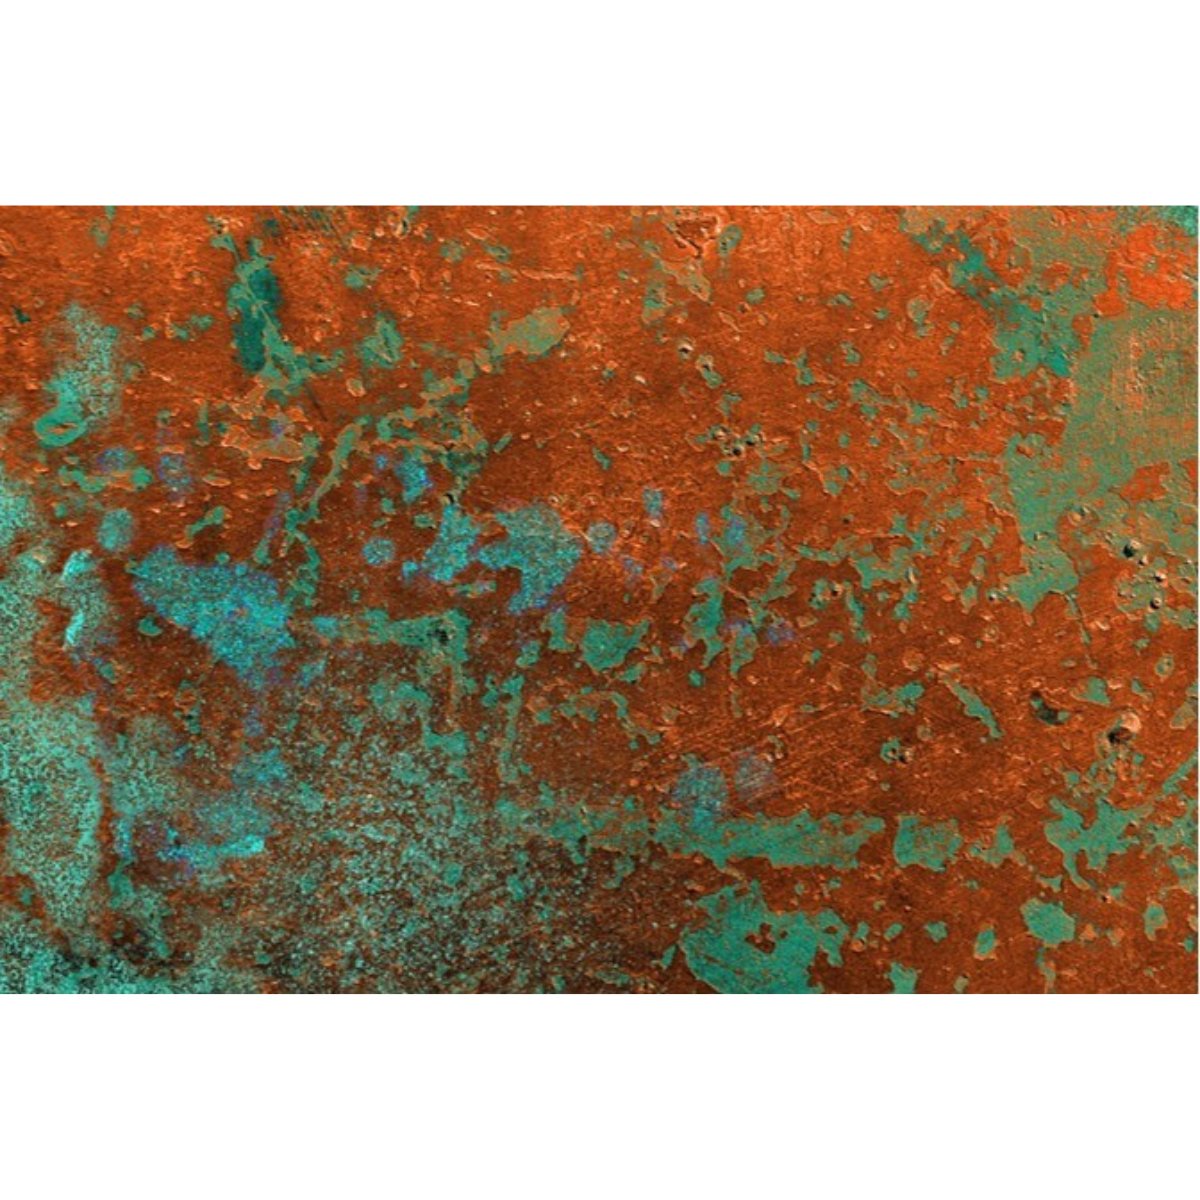 Roycycled Treasures - Copper Decoupage Paper - 20x30in - Rustic River Home